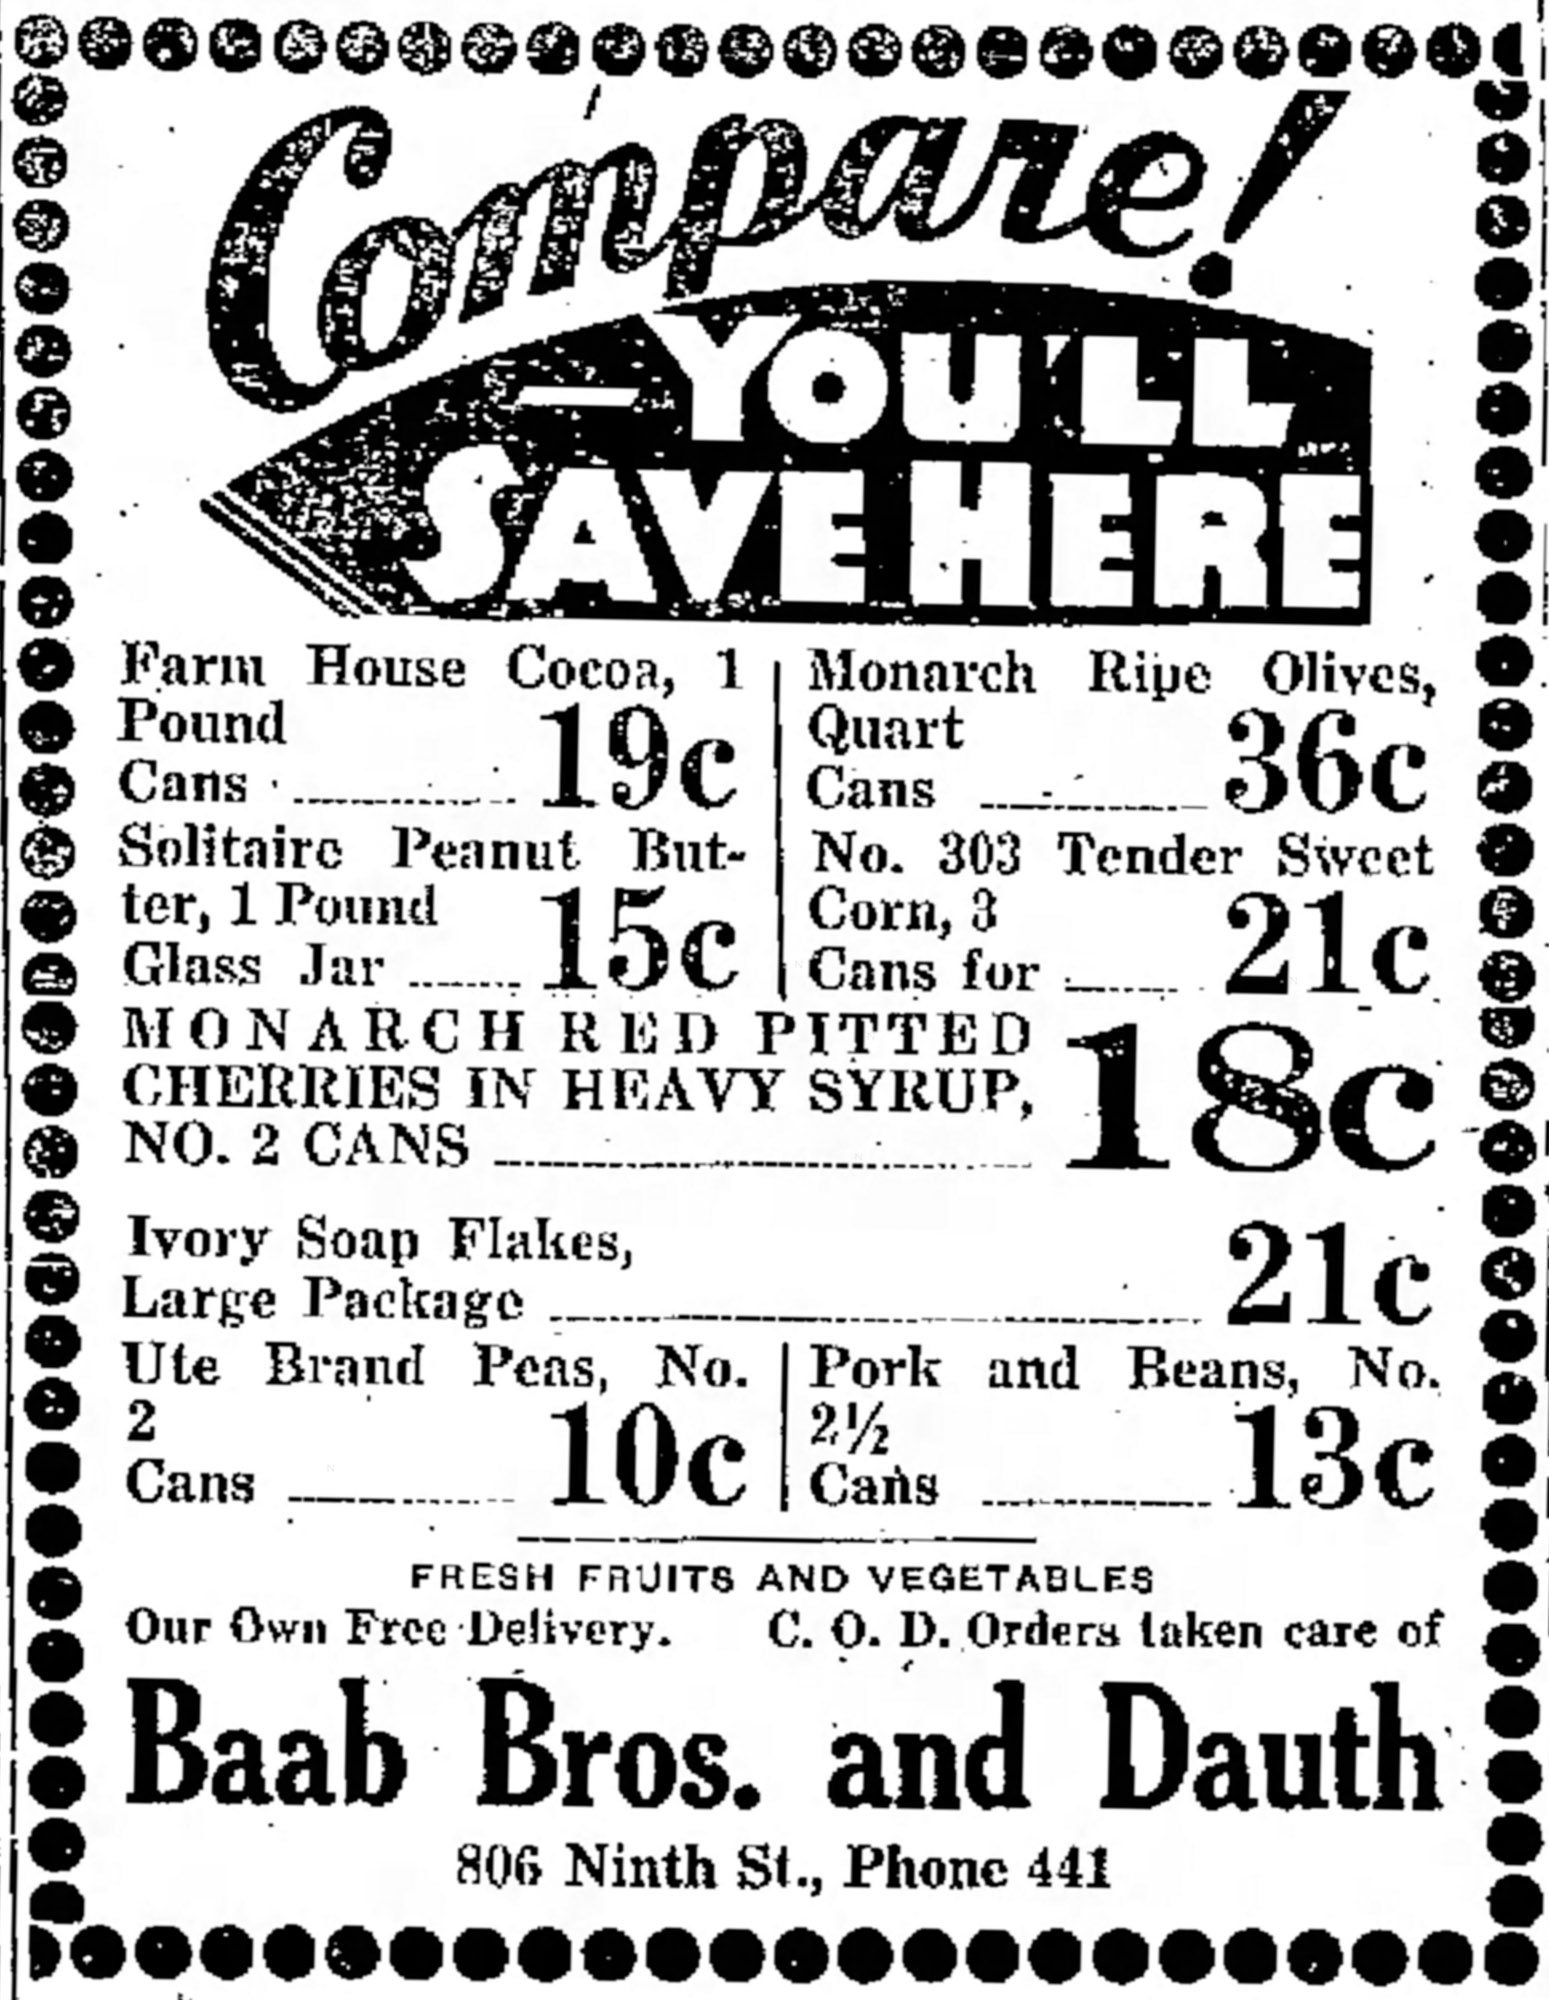 Dauth Family Archive - 1932-09-09 - Greeley Daily Tribune - Baab Bros and Dauth Advertisement